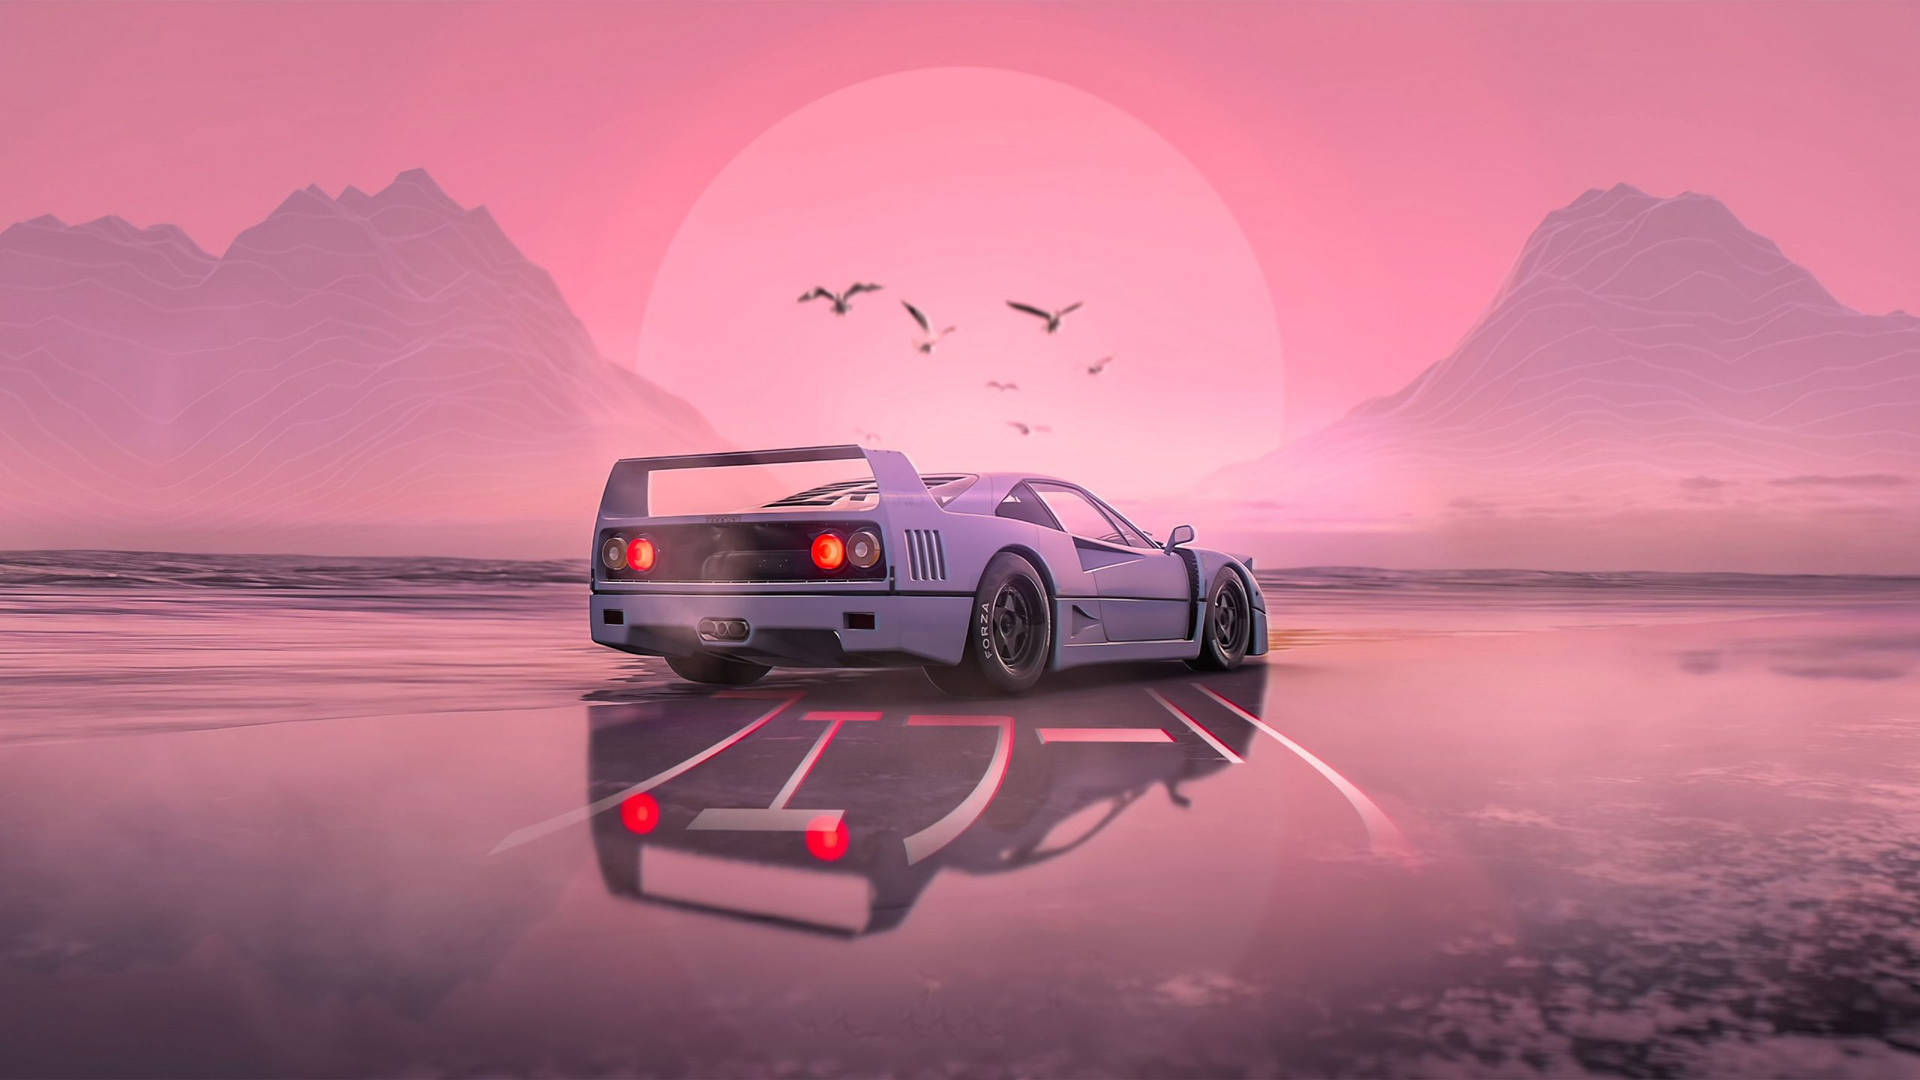 2560X1440 Anime Car Wallpaper and Background